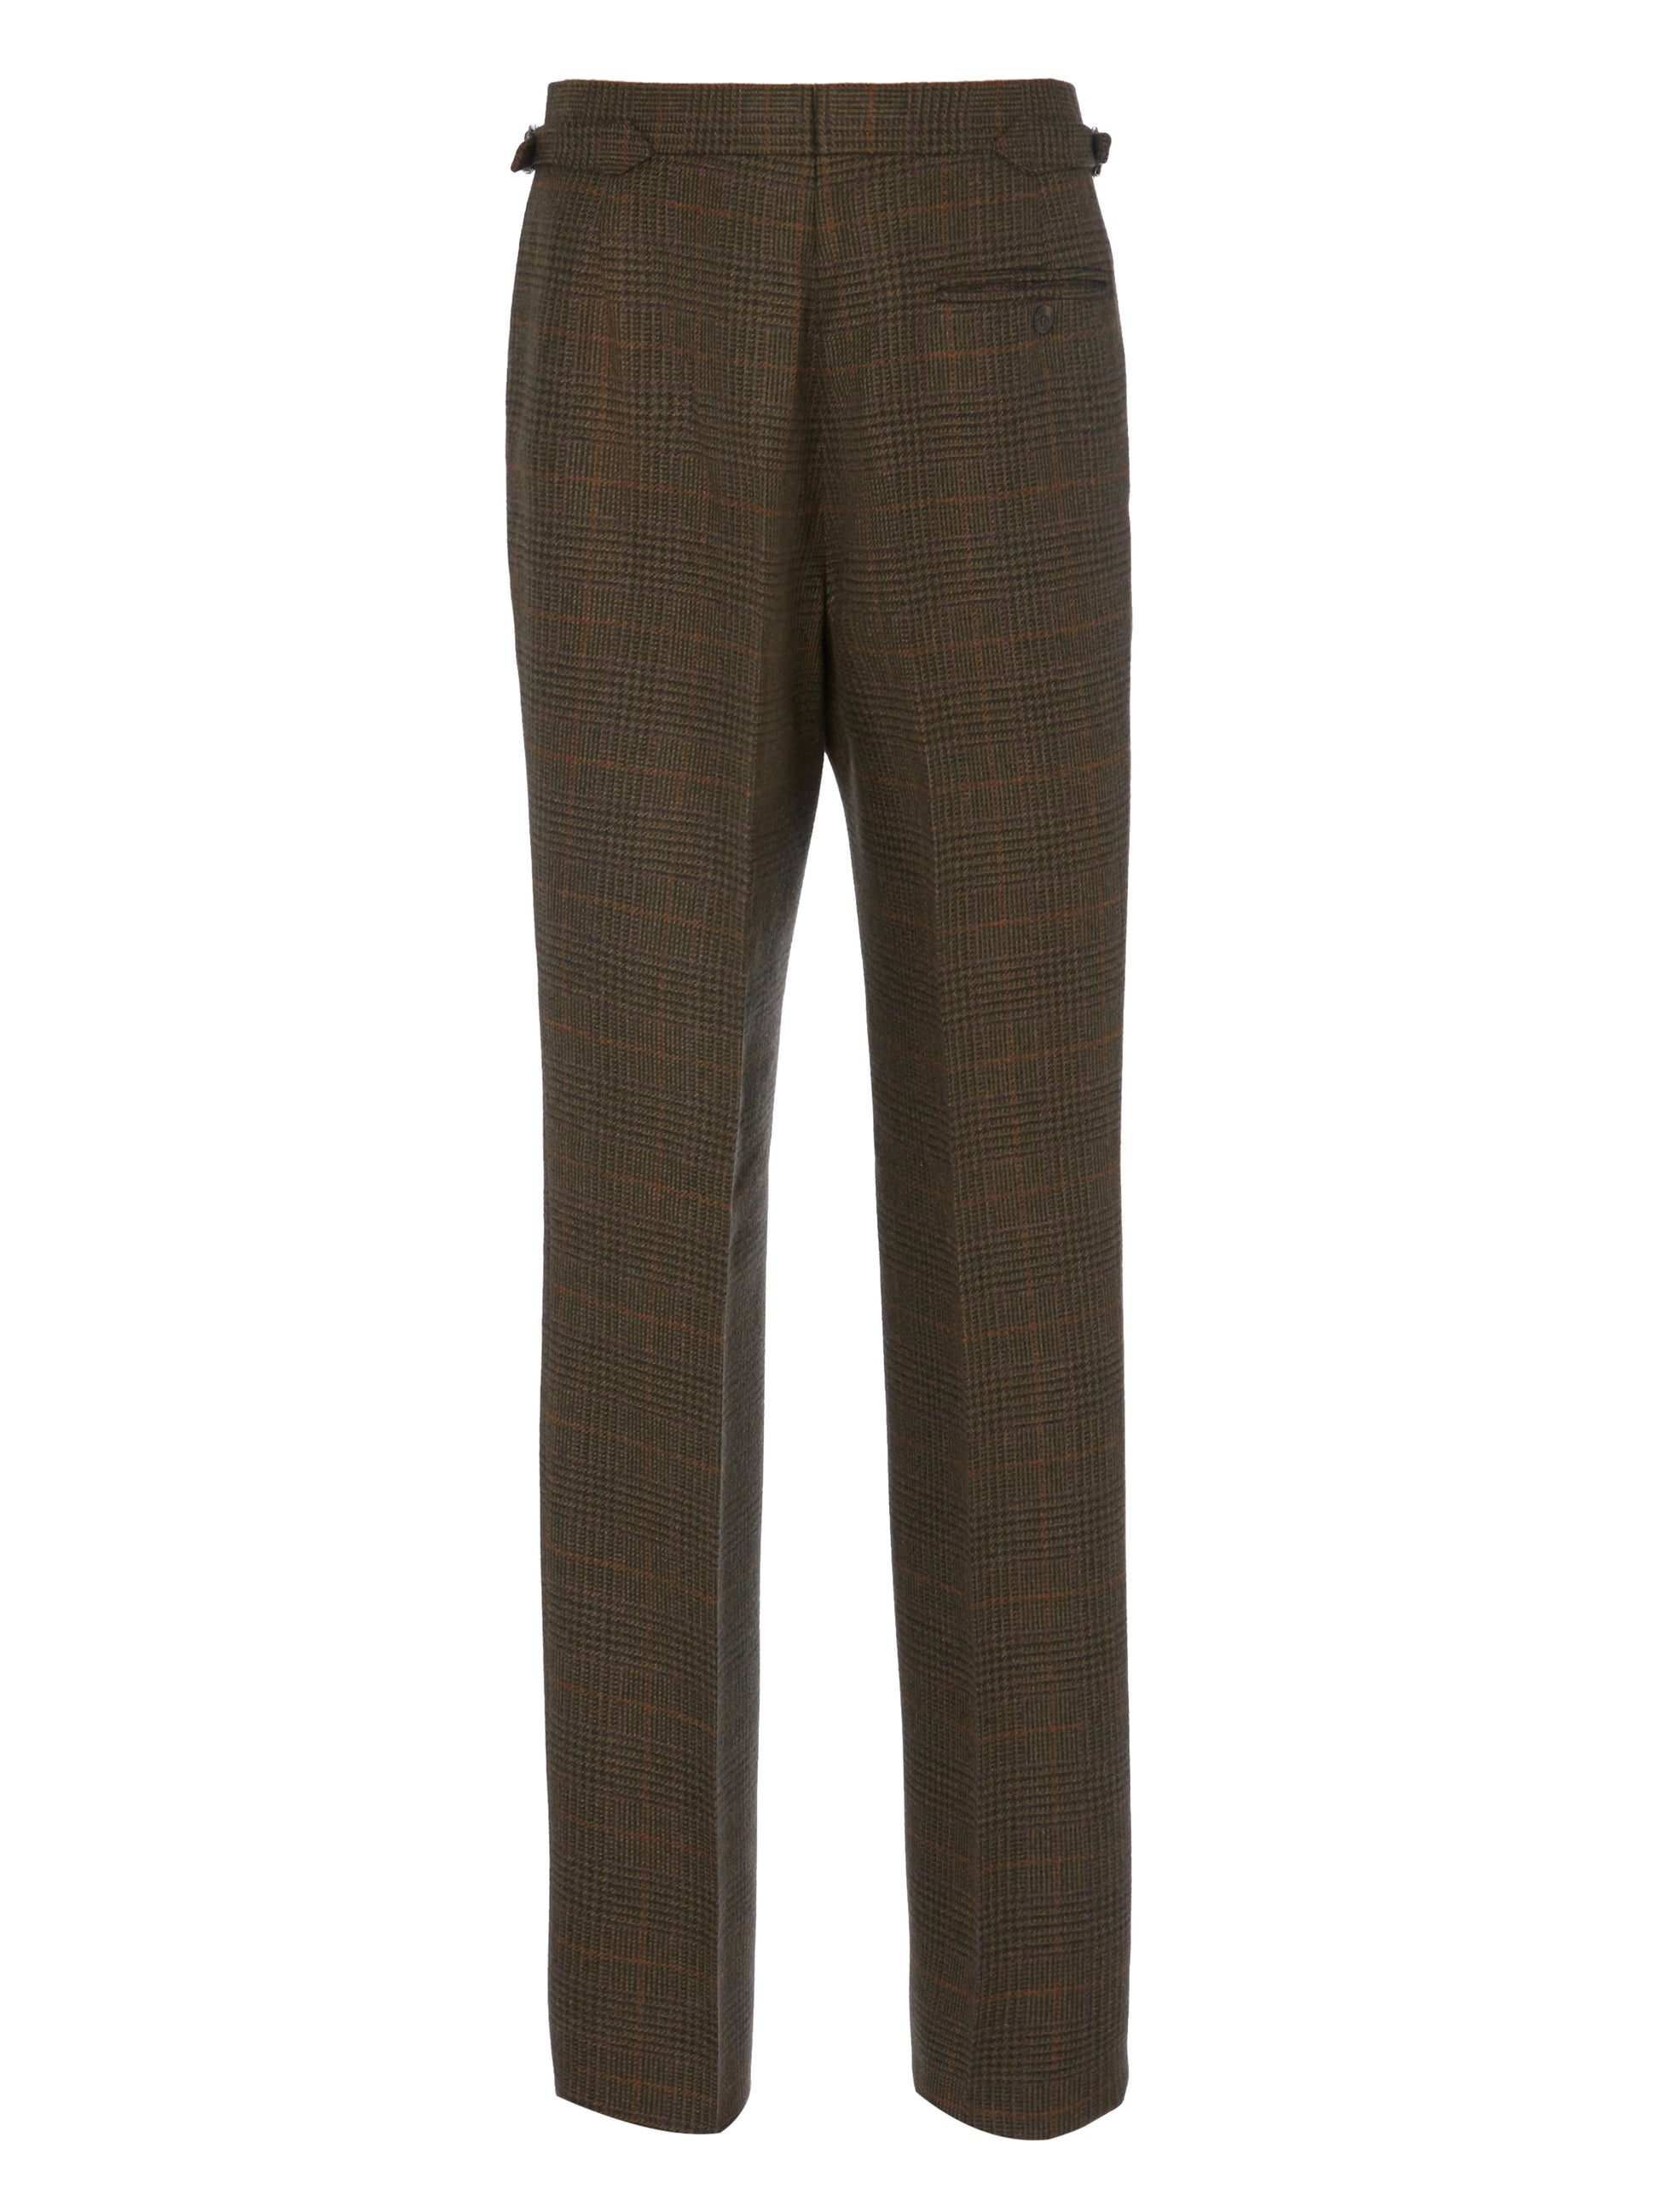 Back view of Oliver Brown pleated trouser in a limited edition tweed